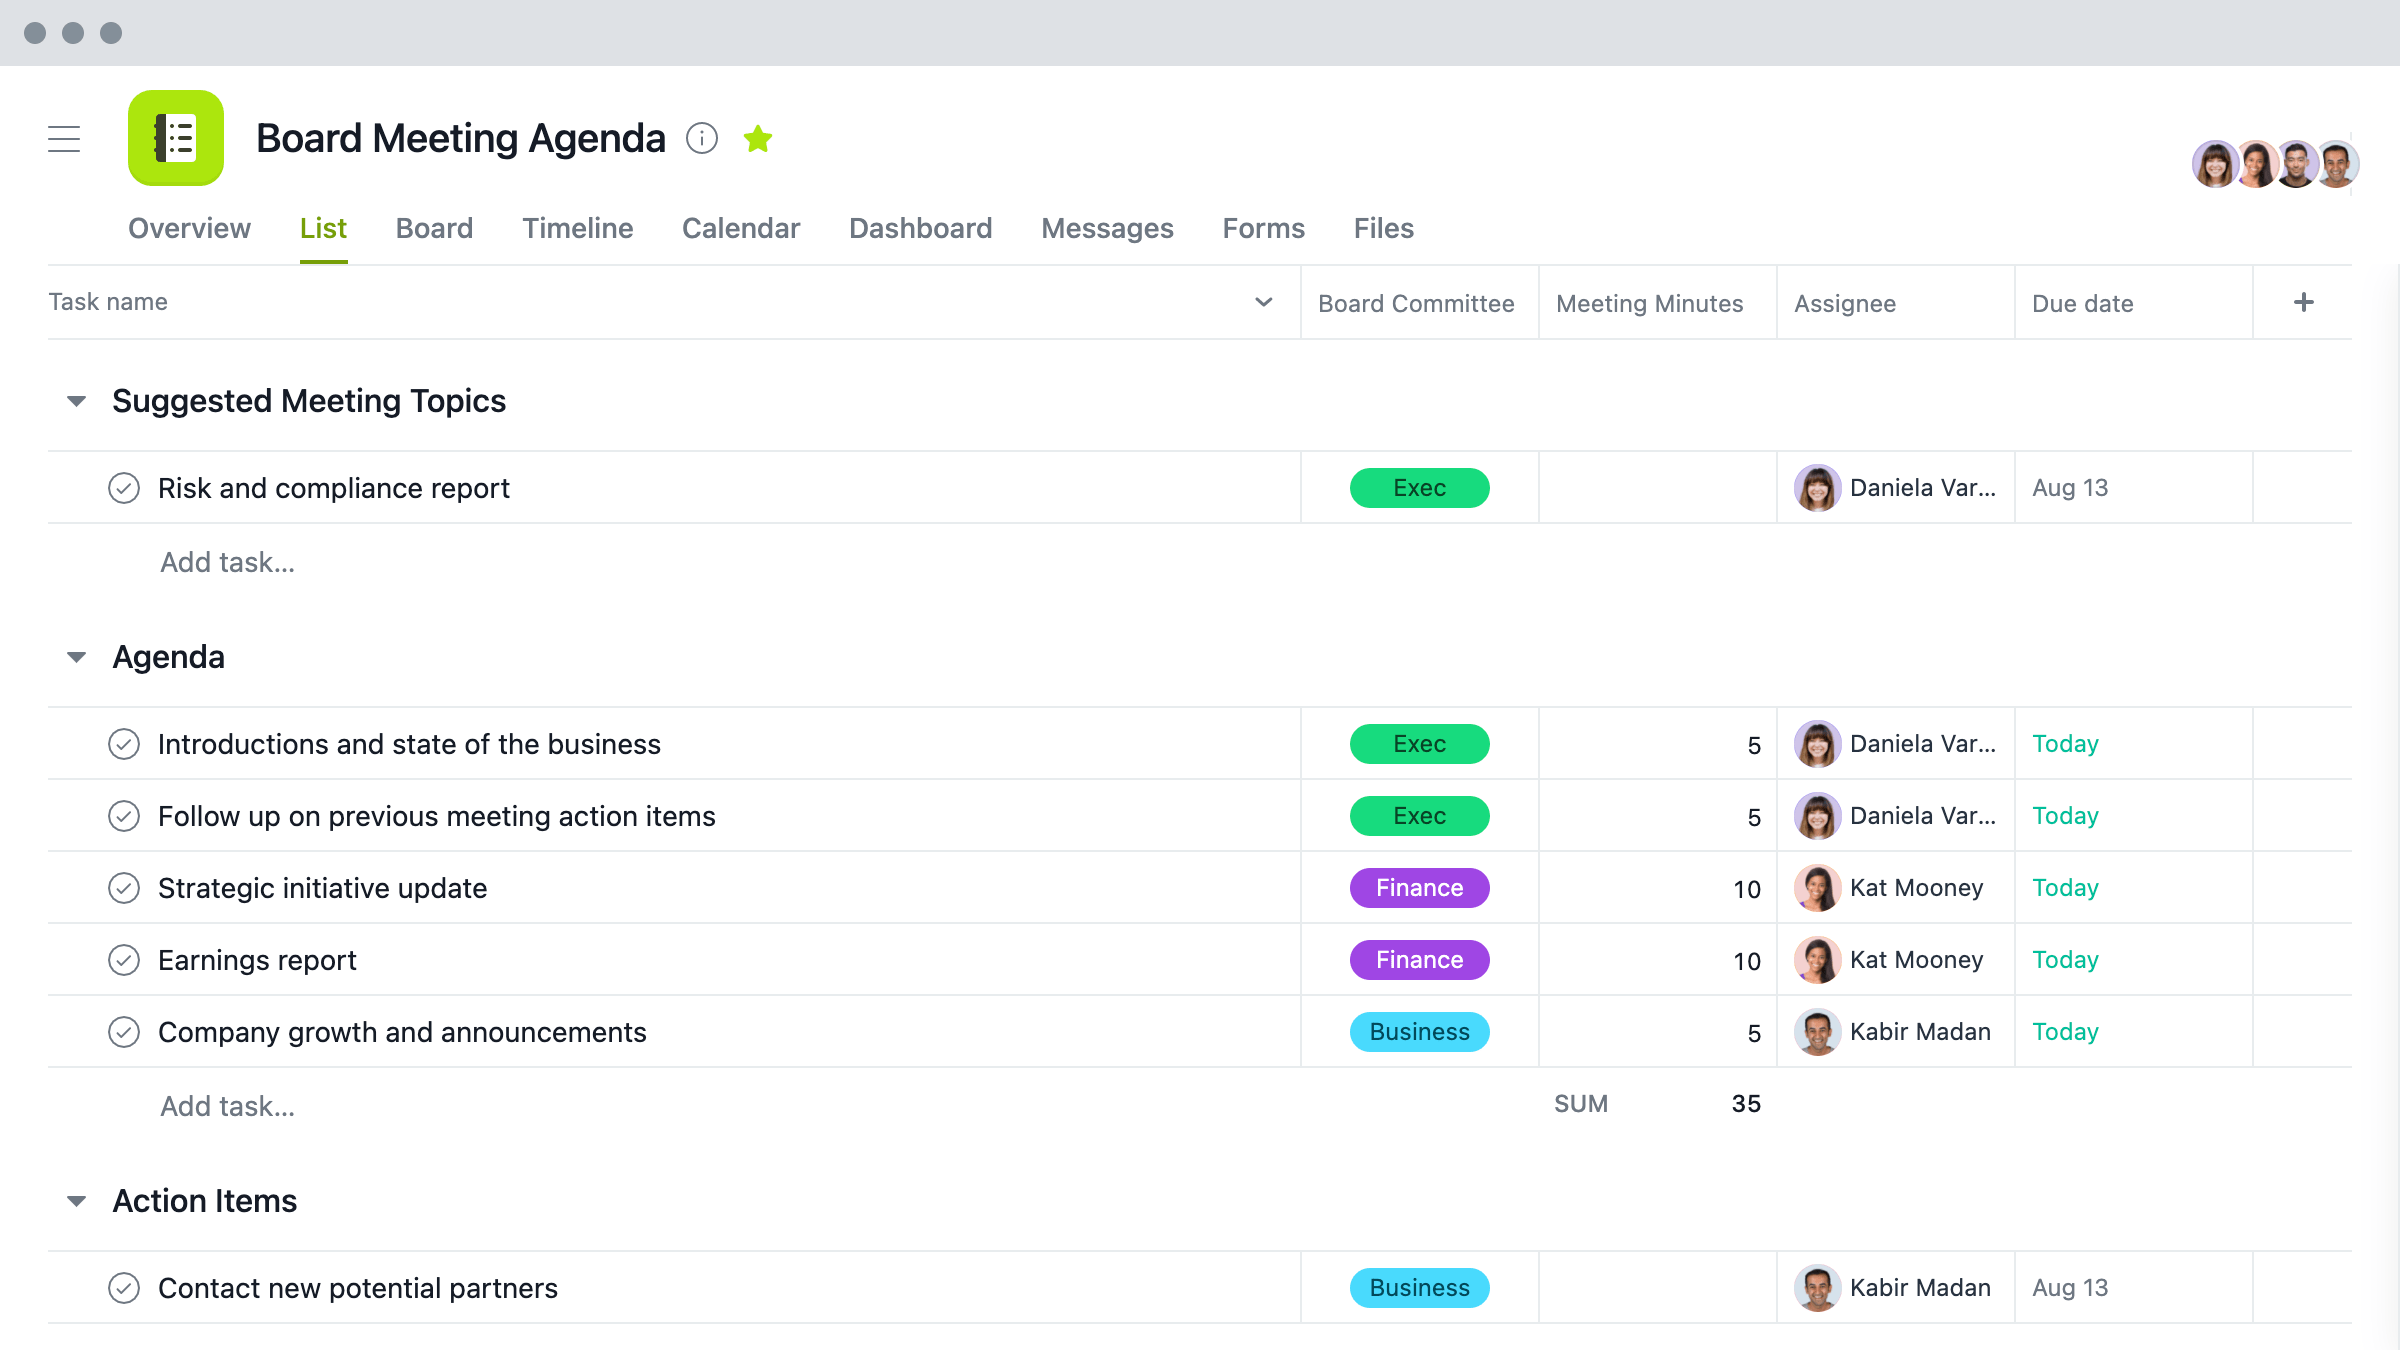 [Product UI] Project Plan Templates - Board Meeting Agenda in Asana (Lists)